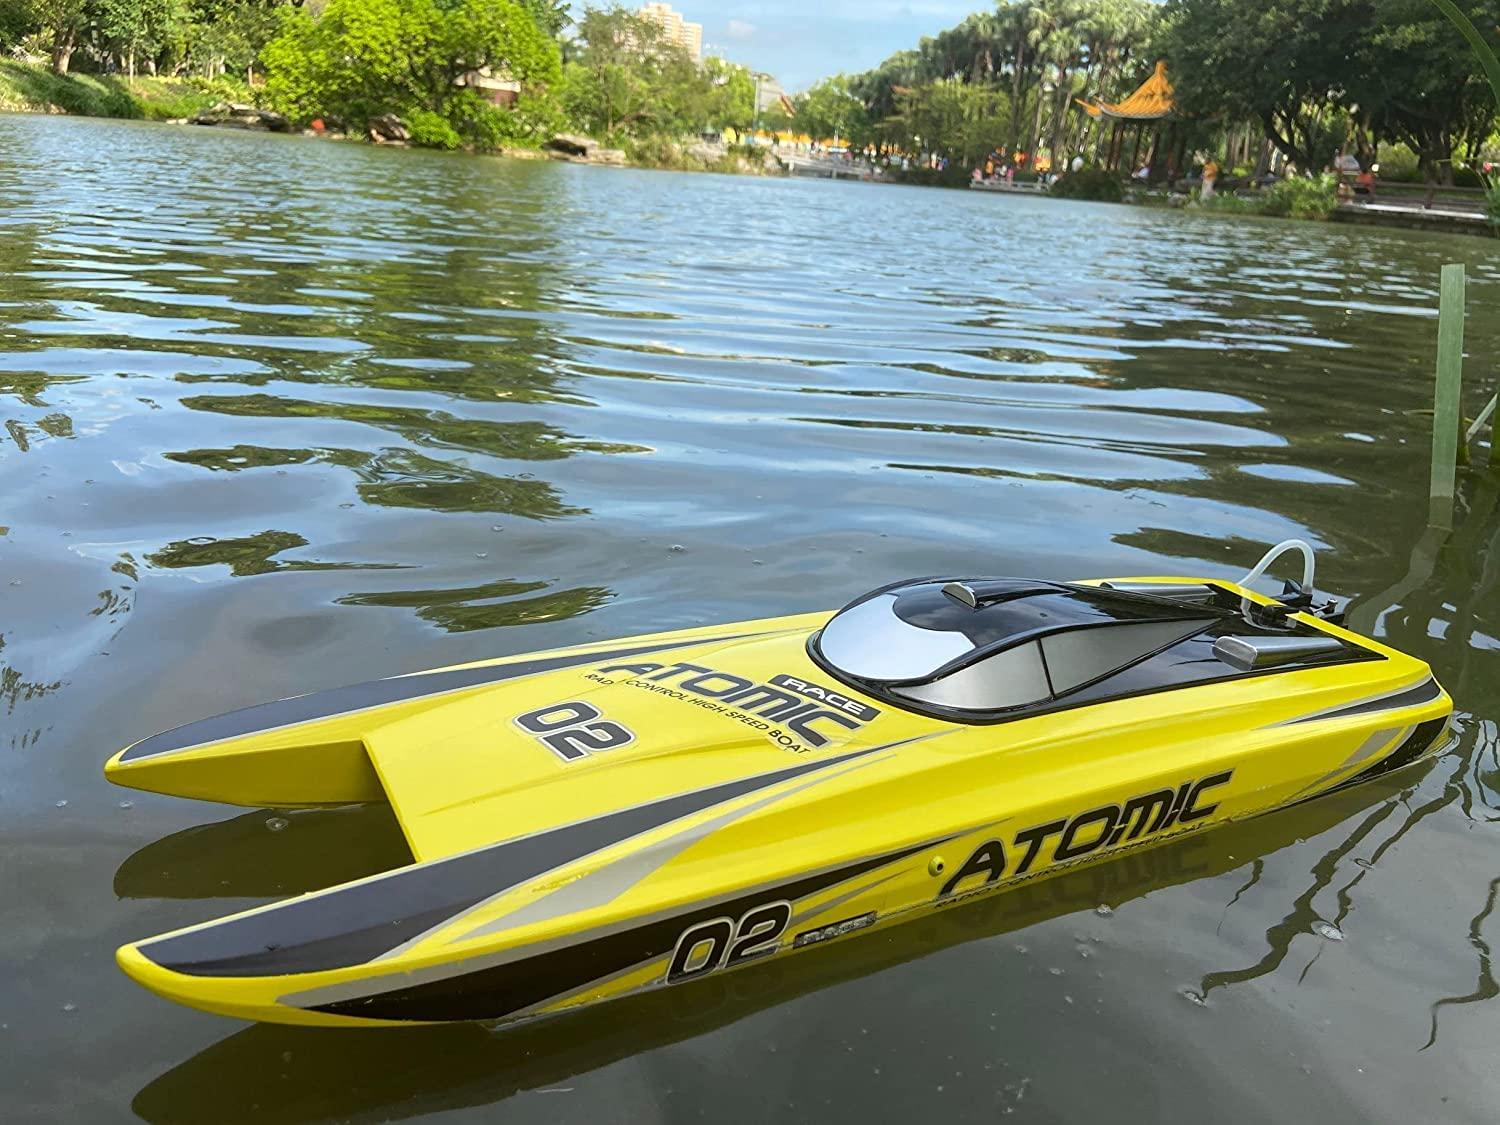 Big Rc Speed Boats: Specific Purposes of Big RC Speed Boats